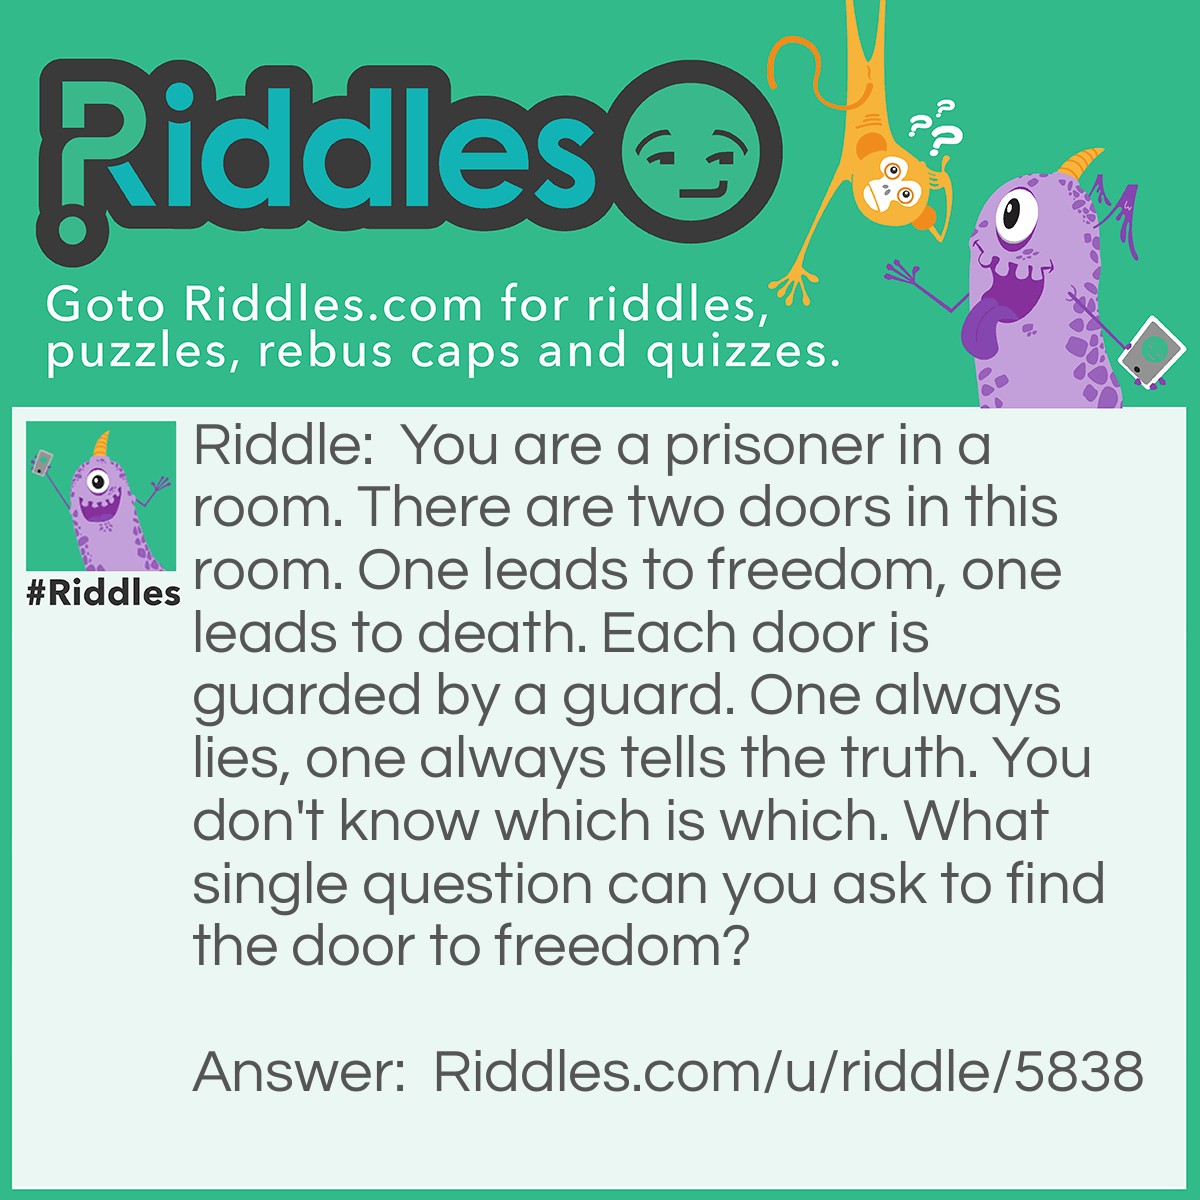 Riddle: You are a prisoner in a room. There are two doors in this room. One leads to freedom, one leads to death. Each door is guarded by a guard. One always lies, one always tells the truth. You don't know which is which. What single question can you ask to find the door to freedom? Answer: "If I were to ask the other guard which door leads to freedom, what would he say?" Then you choose the opposite one. Because if you ask the one that tells the truth, he would say the one that leads to death. The lying one will also say the one that leads to death, because he lies.